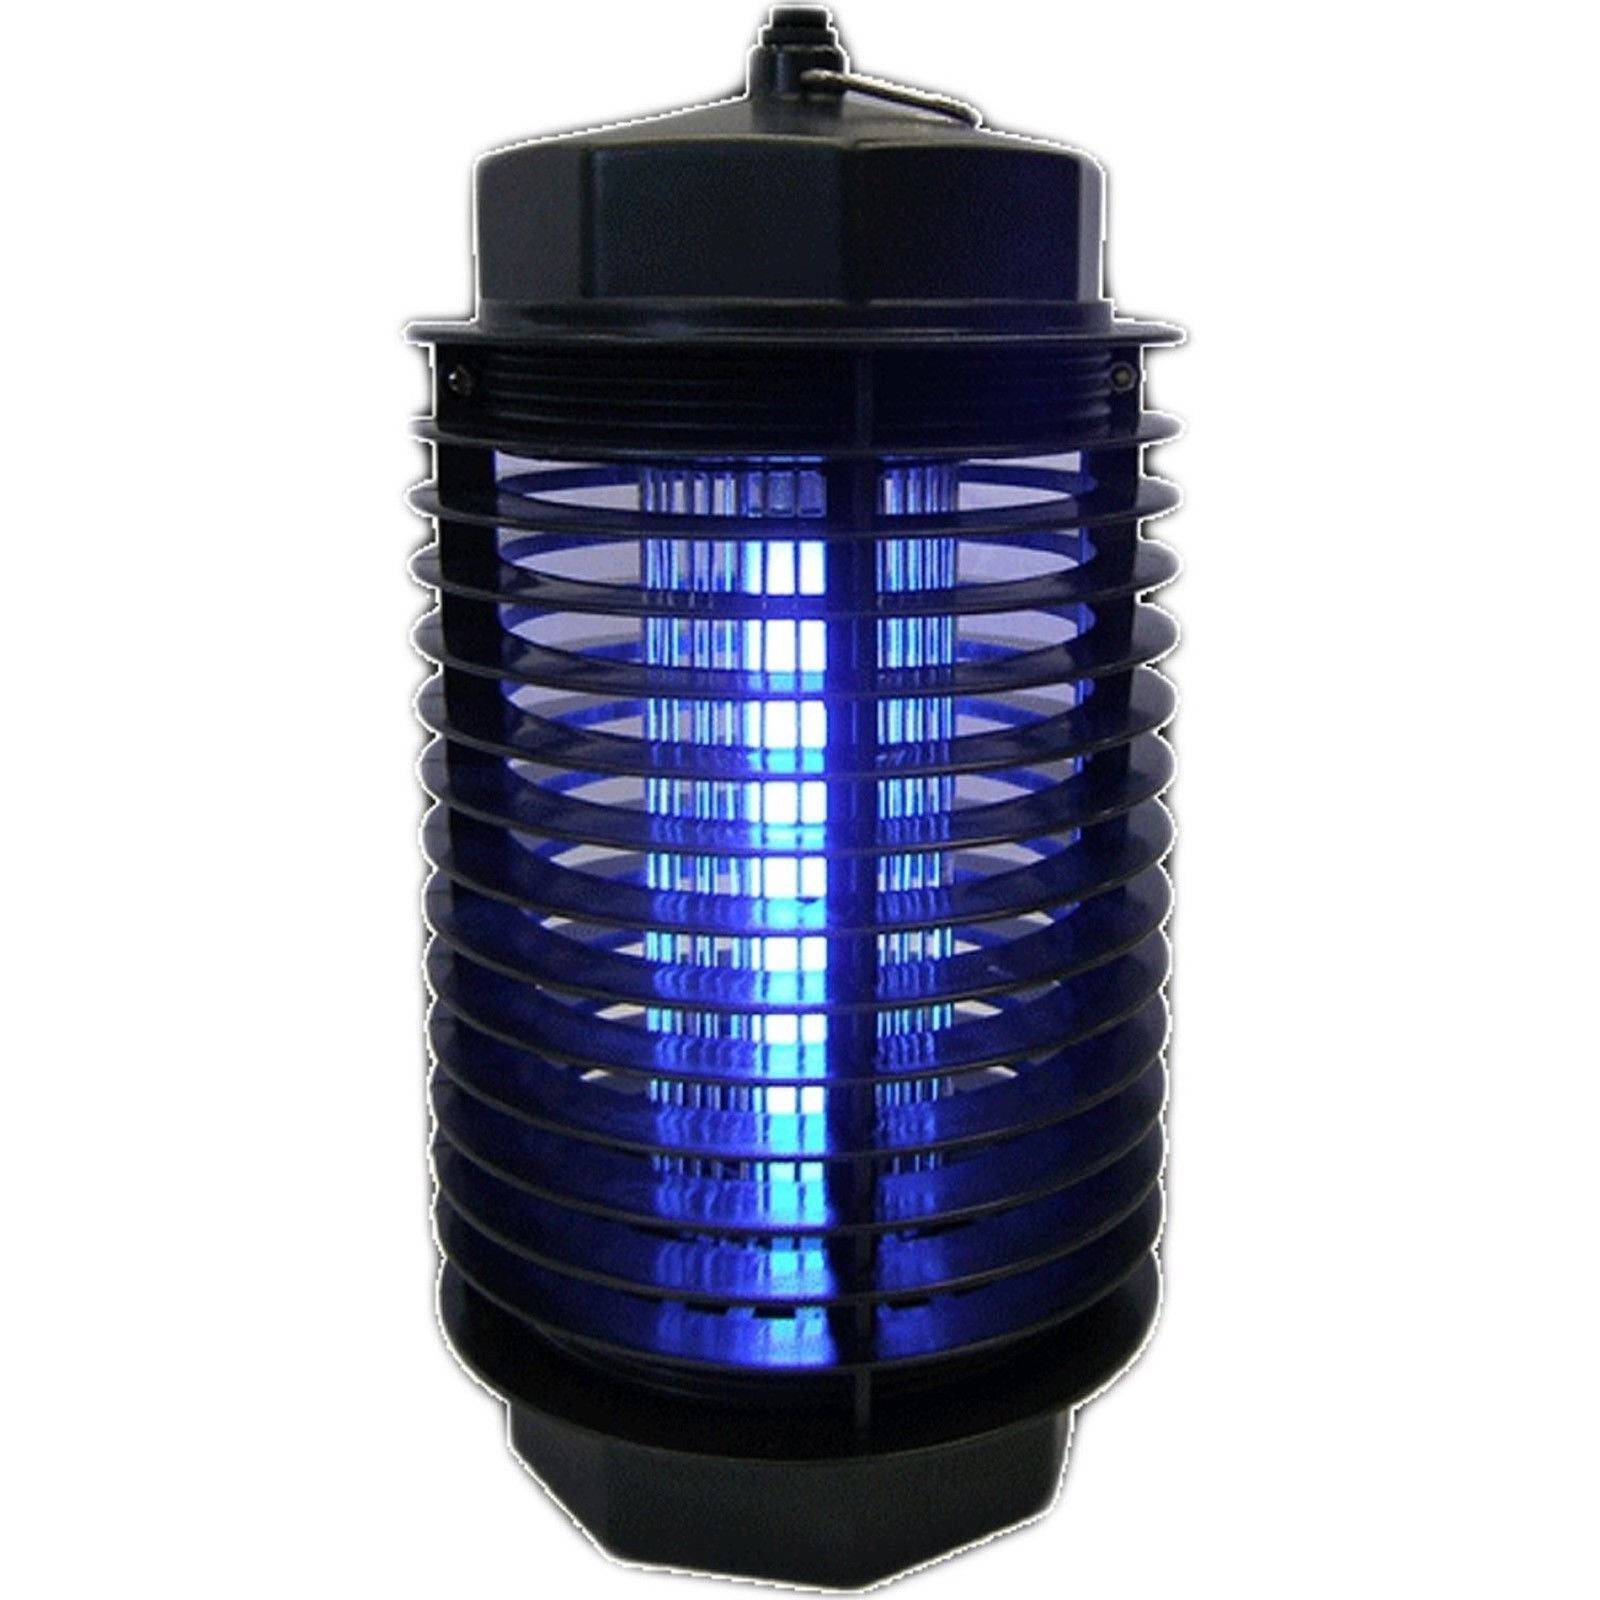 ELECTRONIC UV INSECT KILLER ELECTRIC ULTRAVIOLET MOSQUITO PEST FLY BUG ZAPPER